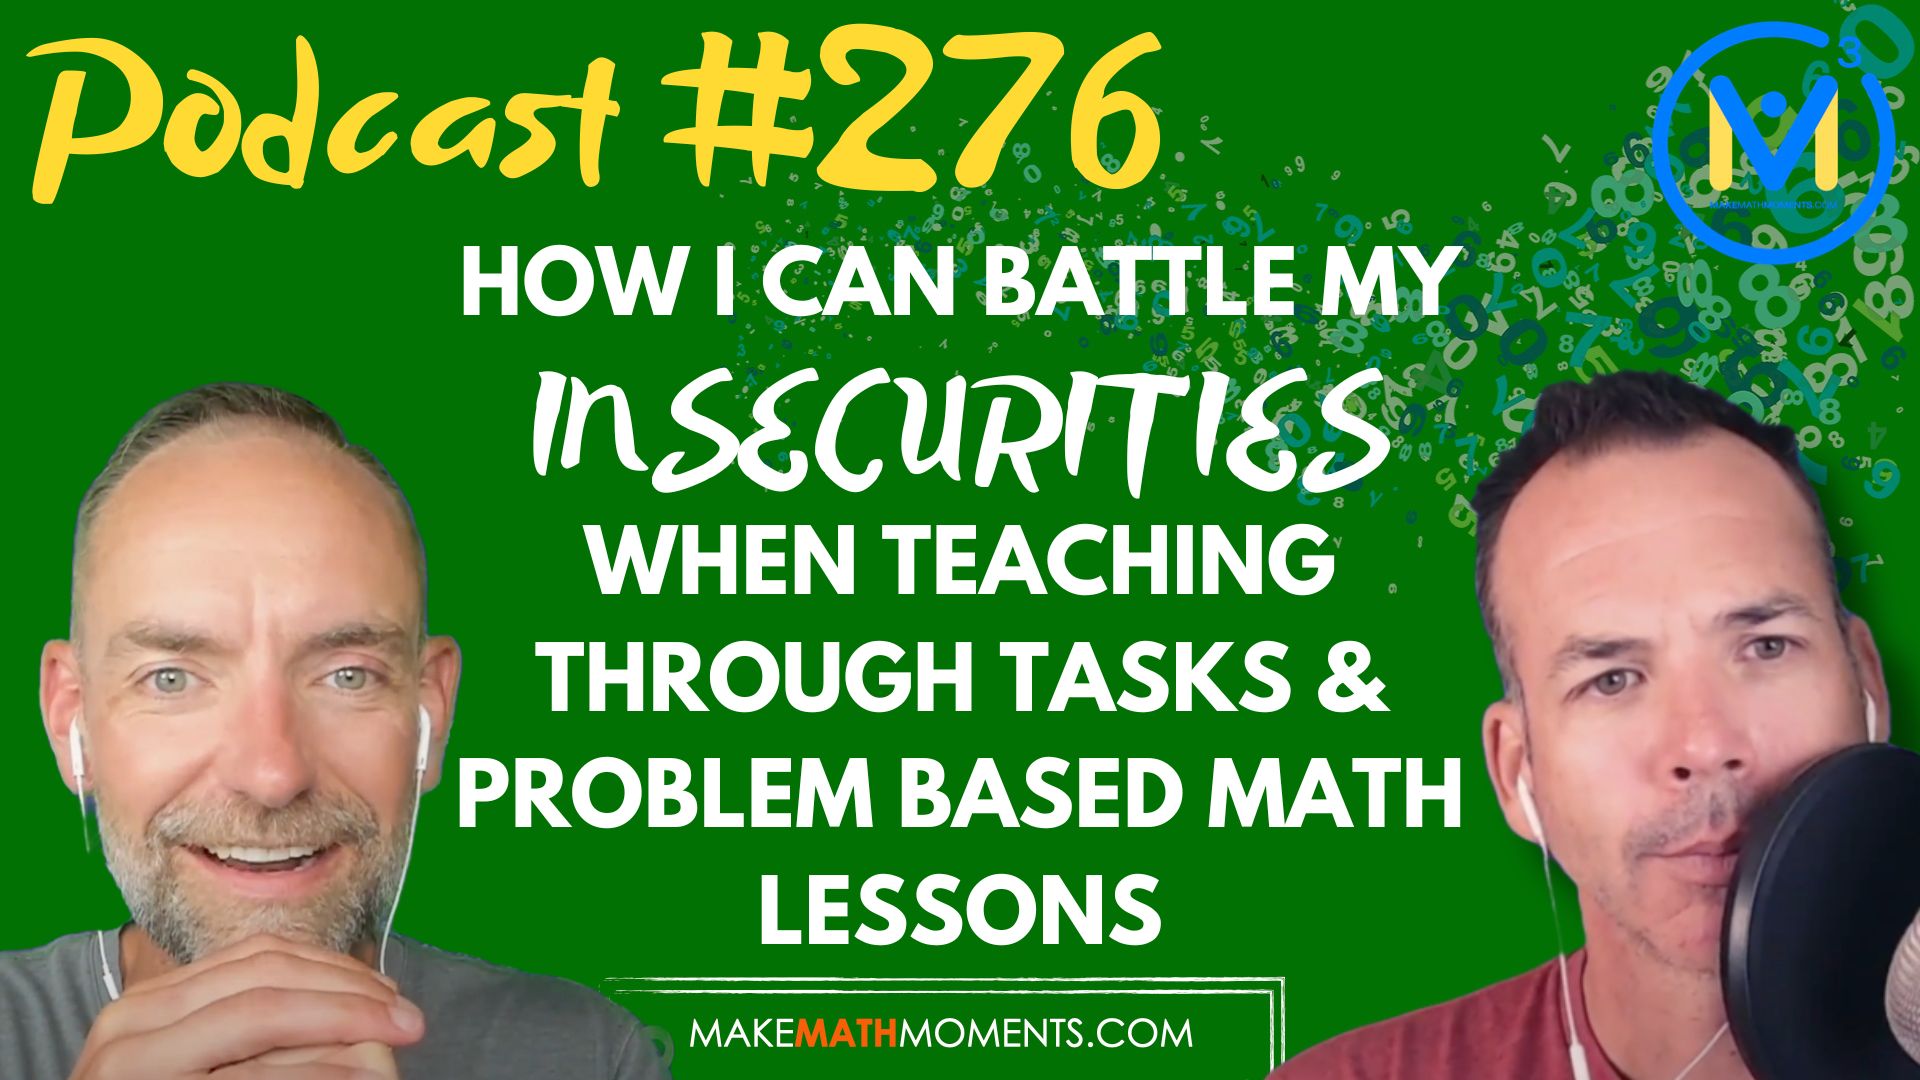 Episode #276: How Can I Battle My Insecurities When Teaching Through Tasks & Problem Based Math Lessons – A Math Mentoring Moment